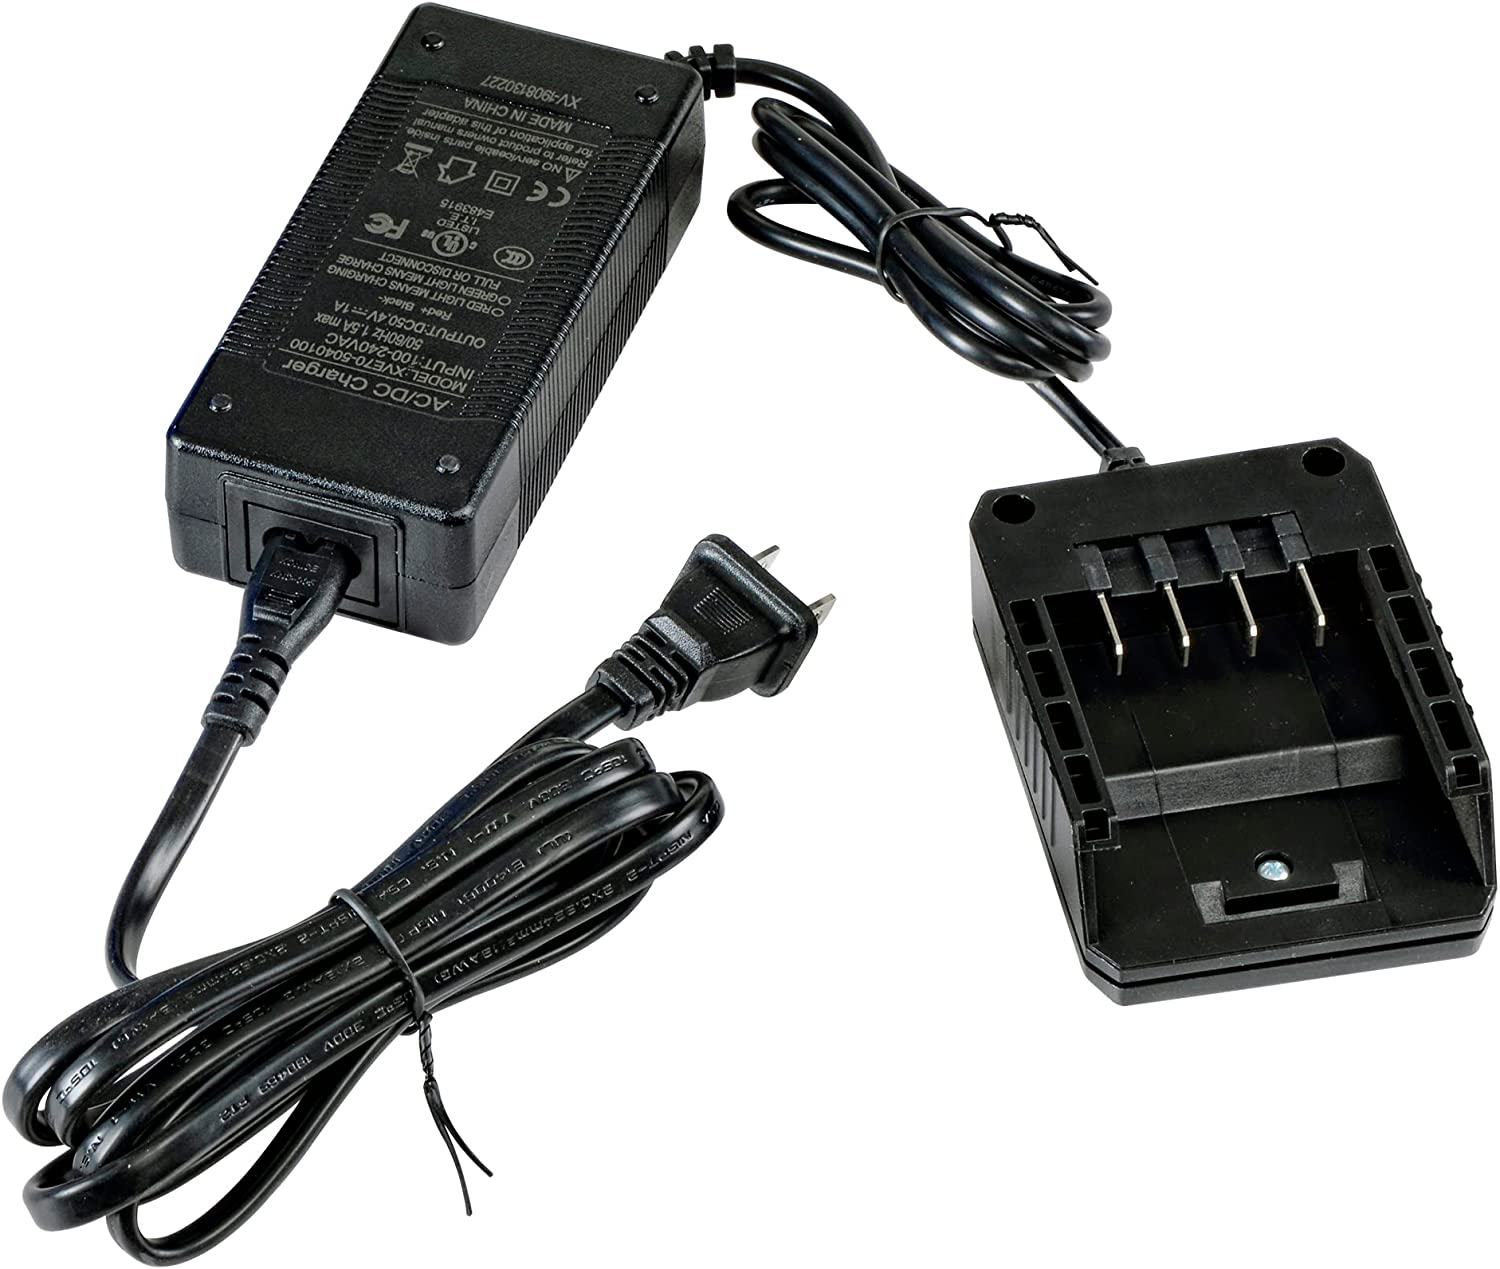 48V LITHIUM ION CHARGER